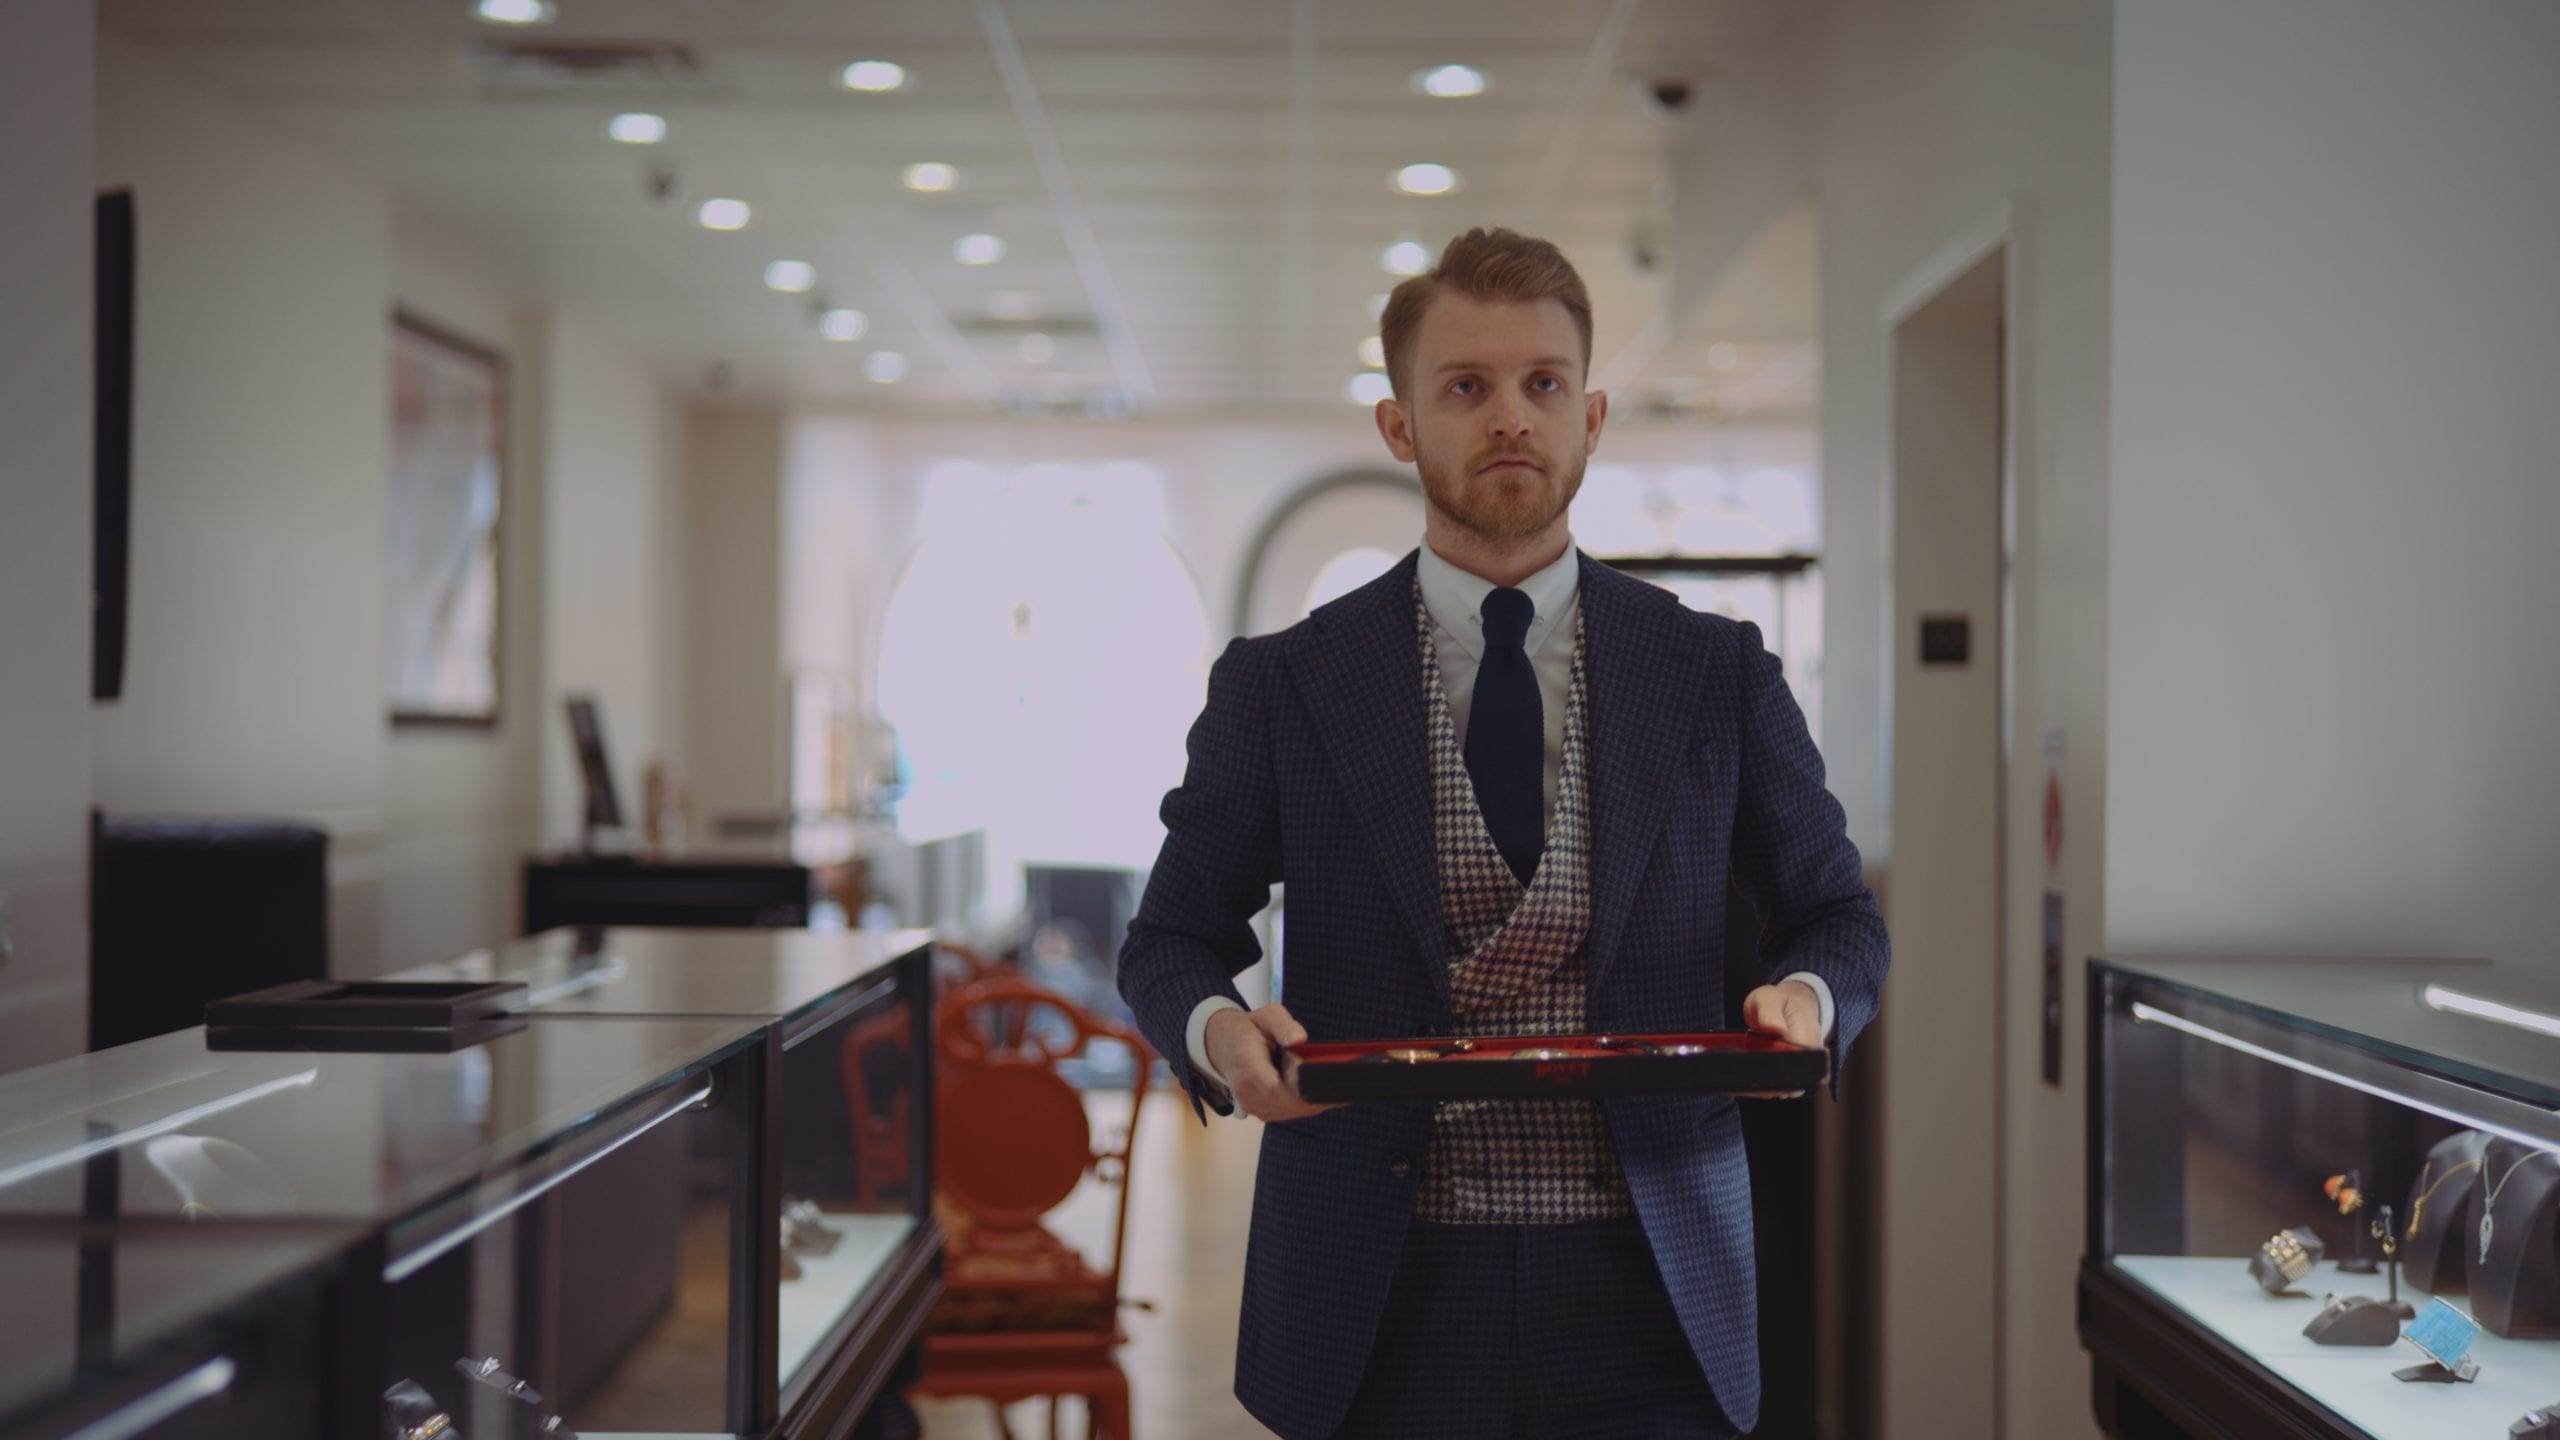 Geneva Seal Chicago Man in a suit and tie carrying tray of jewels in a jewelry shop